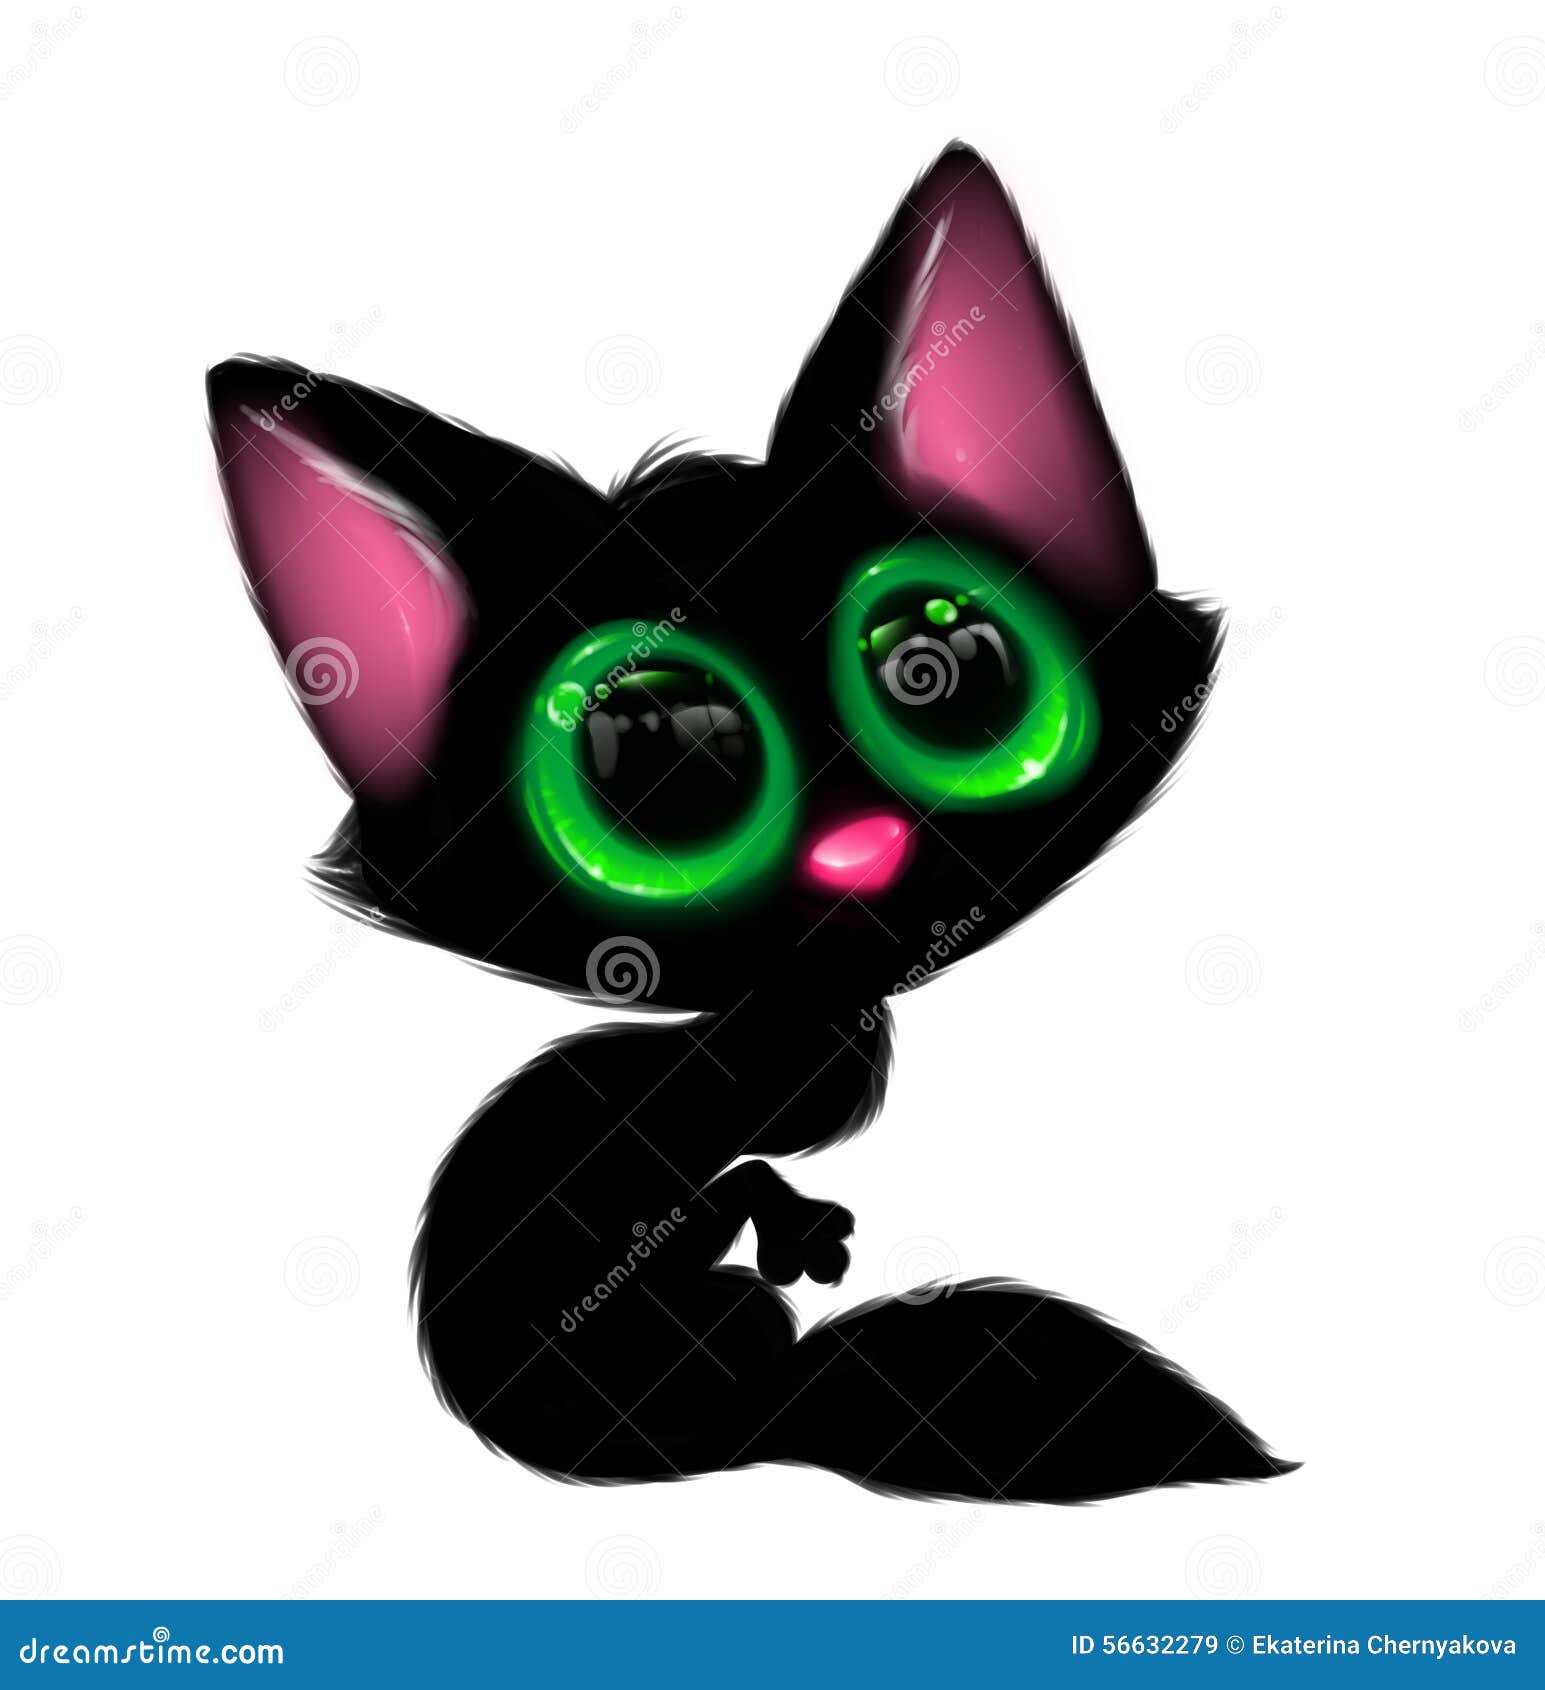 Cute Black Cat Icon. Funny Cartoon Character. Tail, Whisker, Big Eyes.  Royalty Free SVG, Cliparts, Vectors, and Stock Illustration. Image 83559696.